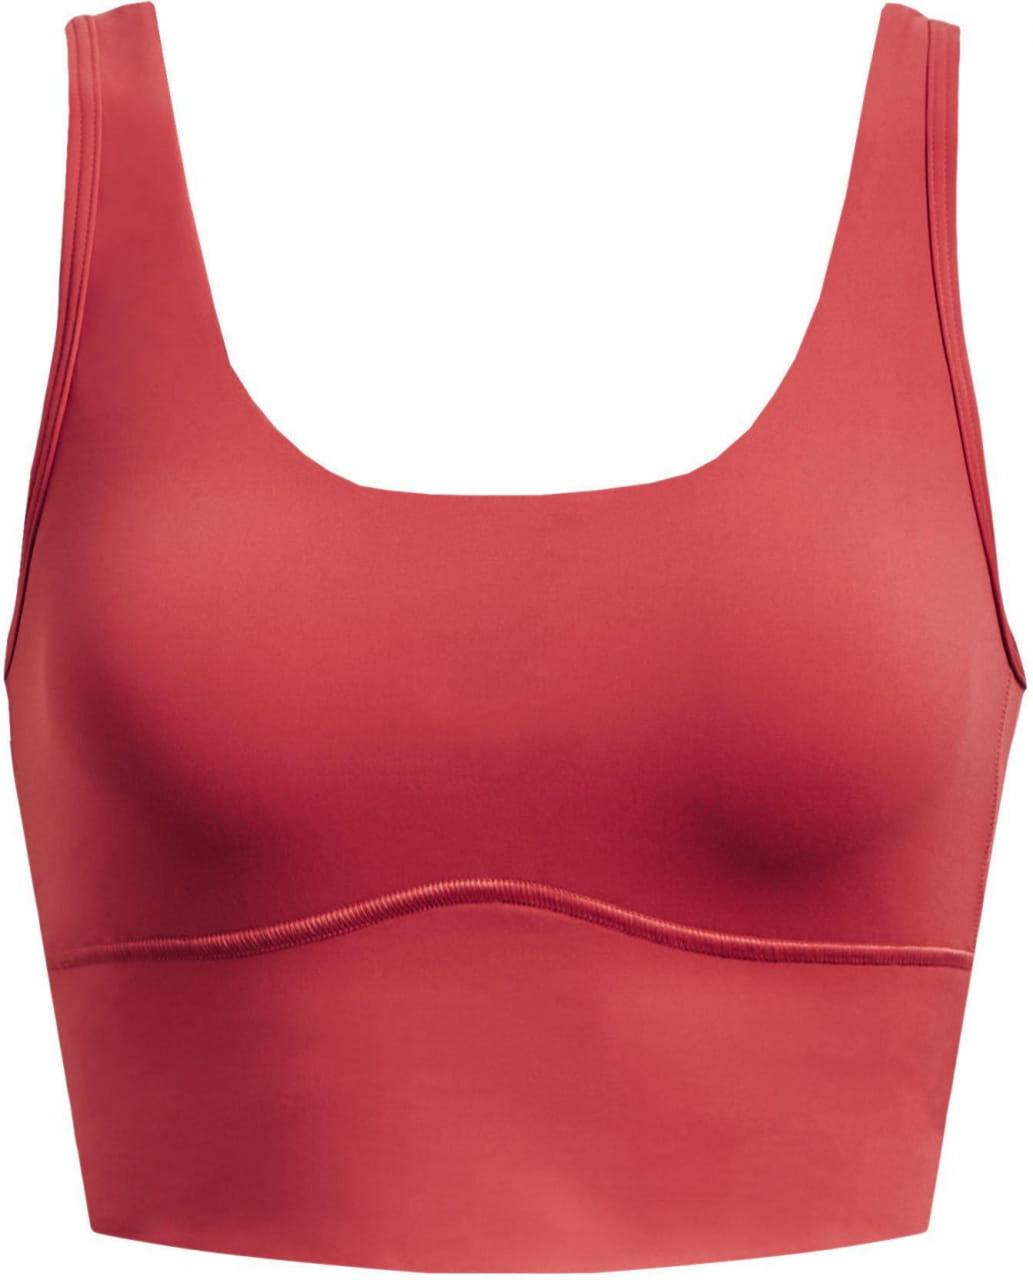 Camiseta deportiva de tirantes para mujer Under Armour Meridian Fitted Crop Tank-RED